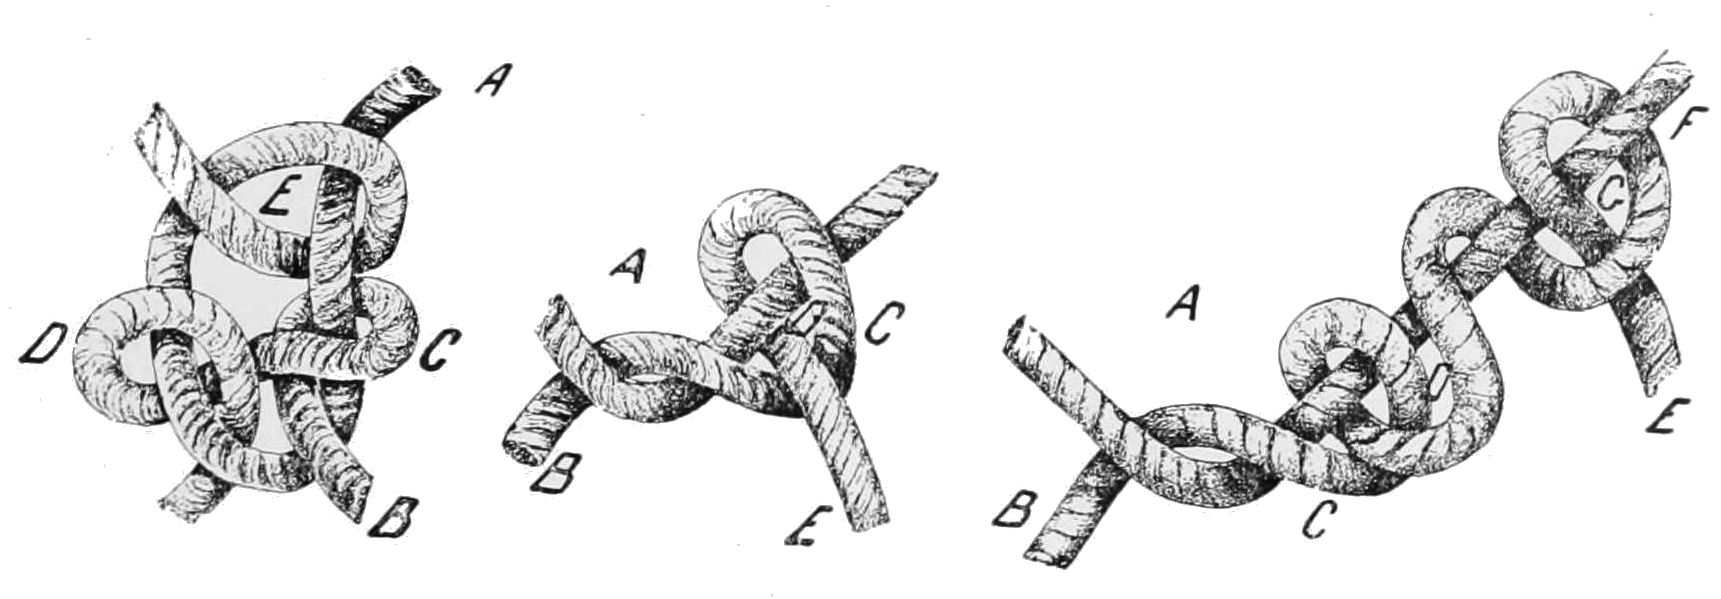 a diagram showing how to tie different kinds of knots